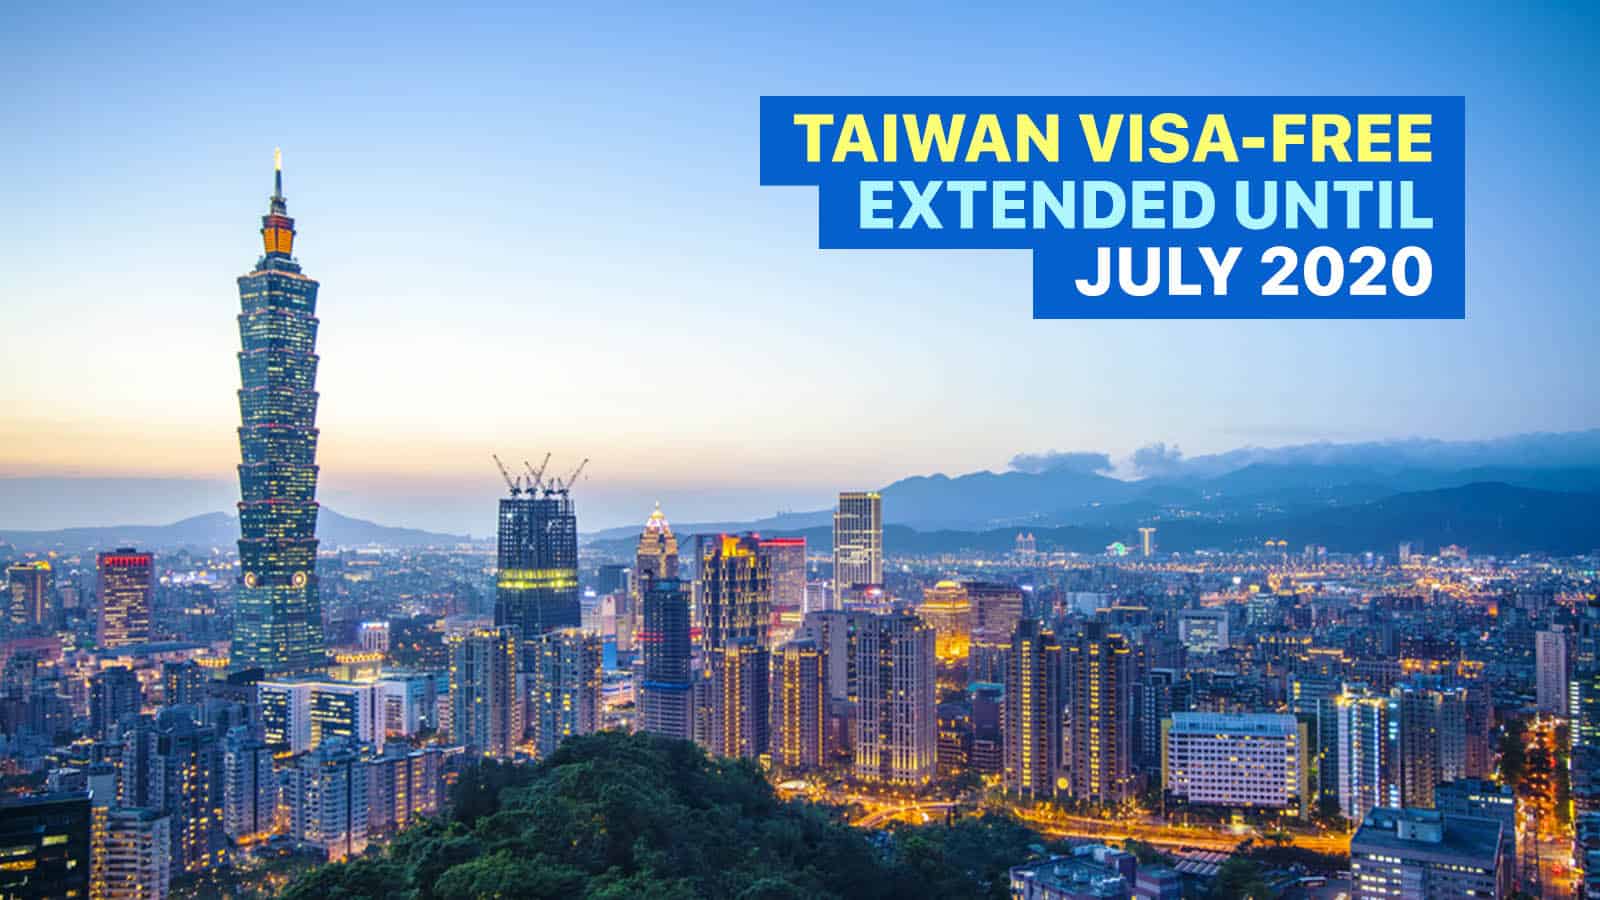 2019 Taipei Taiwan Travel Guide With Budget Itinerary The